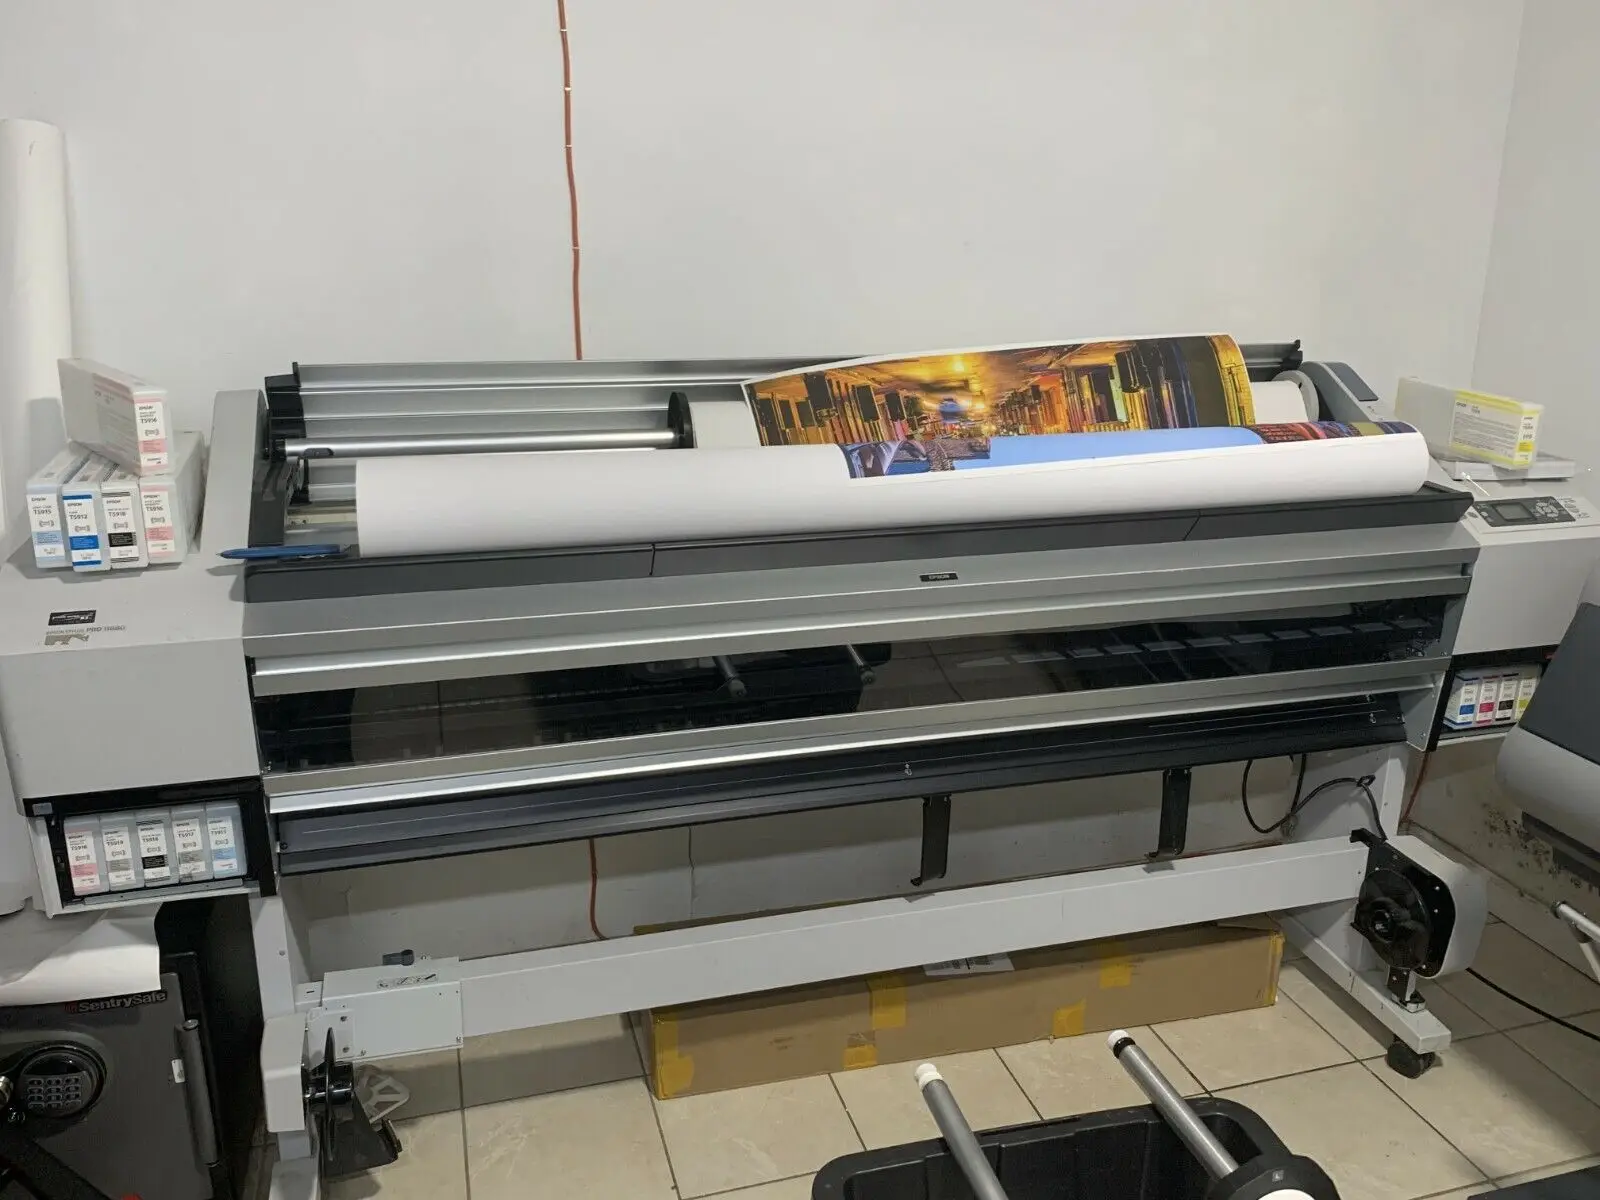 

END OF THE YEAR SALES Real Quality Printers DesignJet Z9 - 44" PostScript Large Format Printer